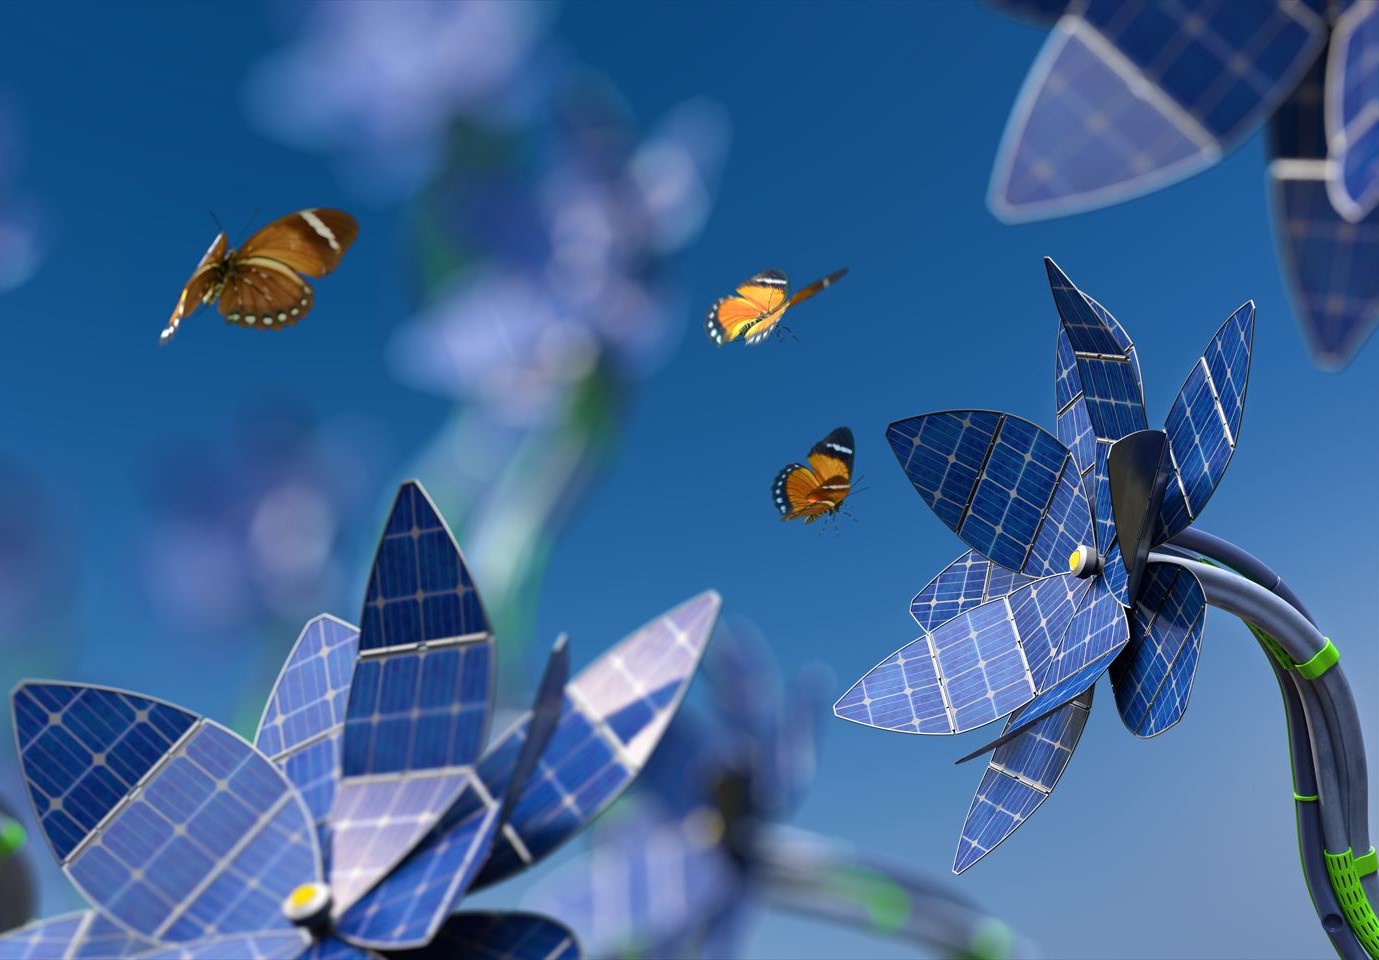 Butterflies flying around futuristic flowers with petals made from solar panels